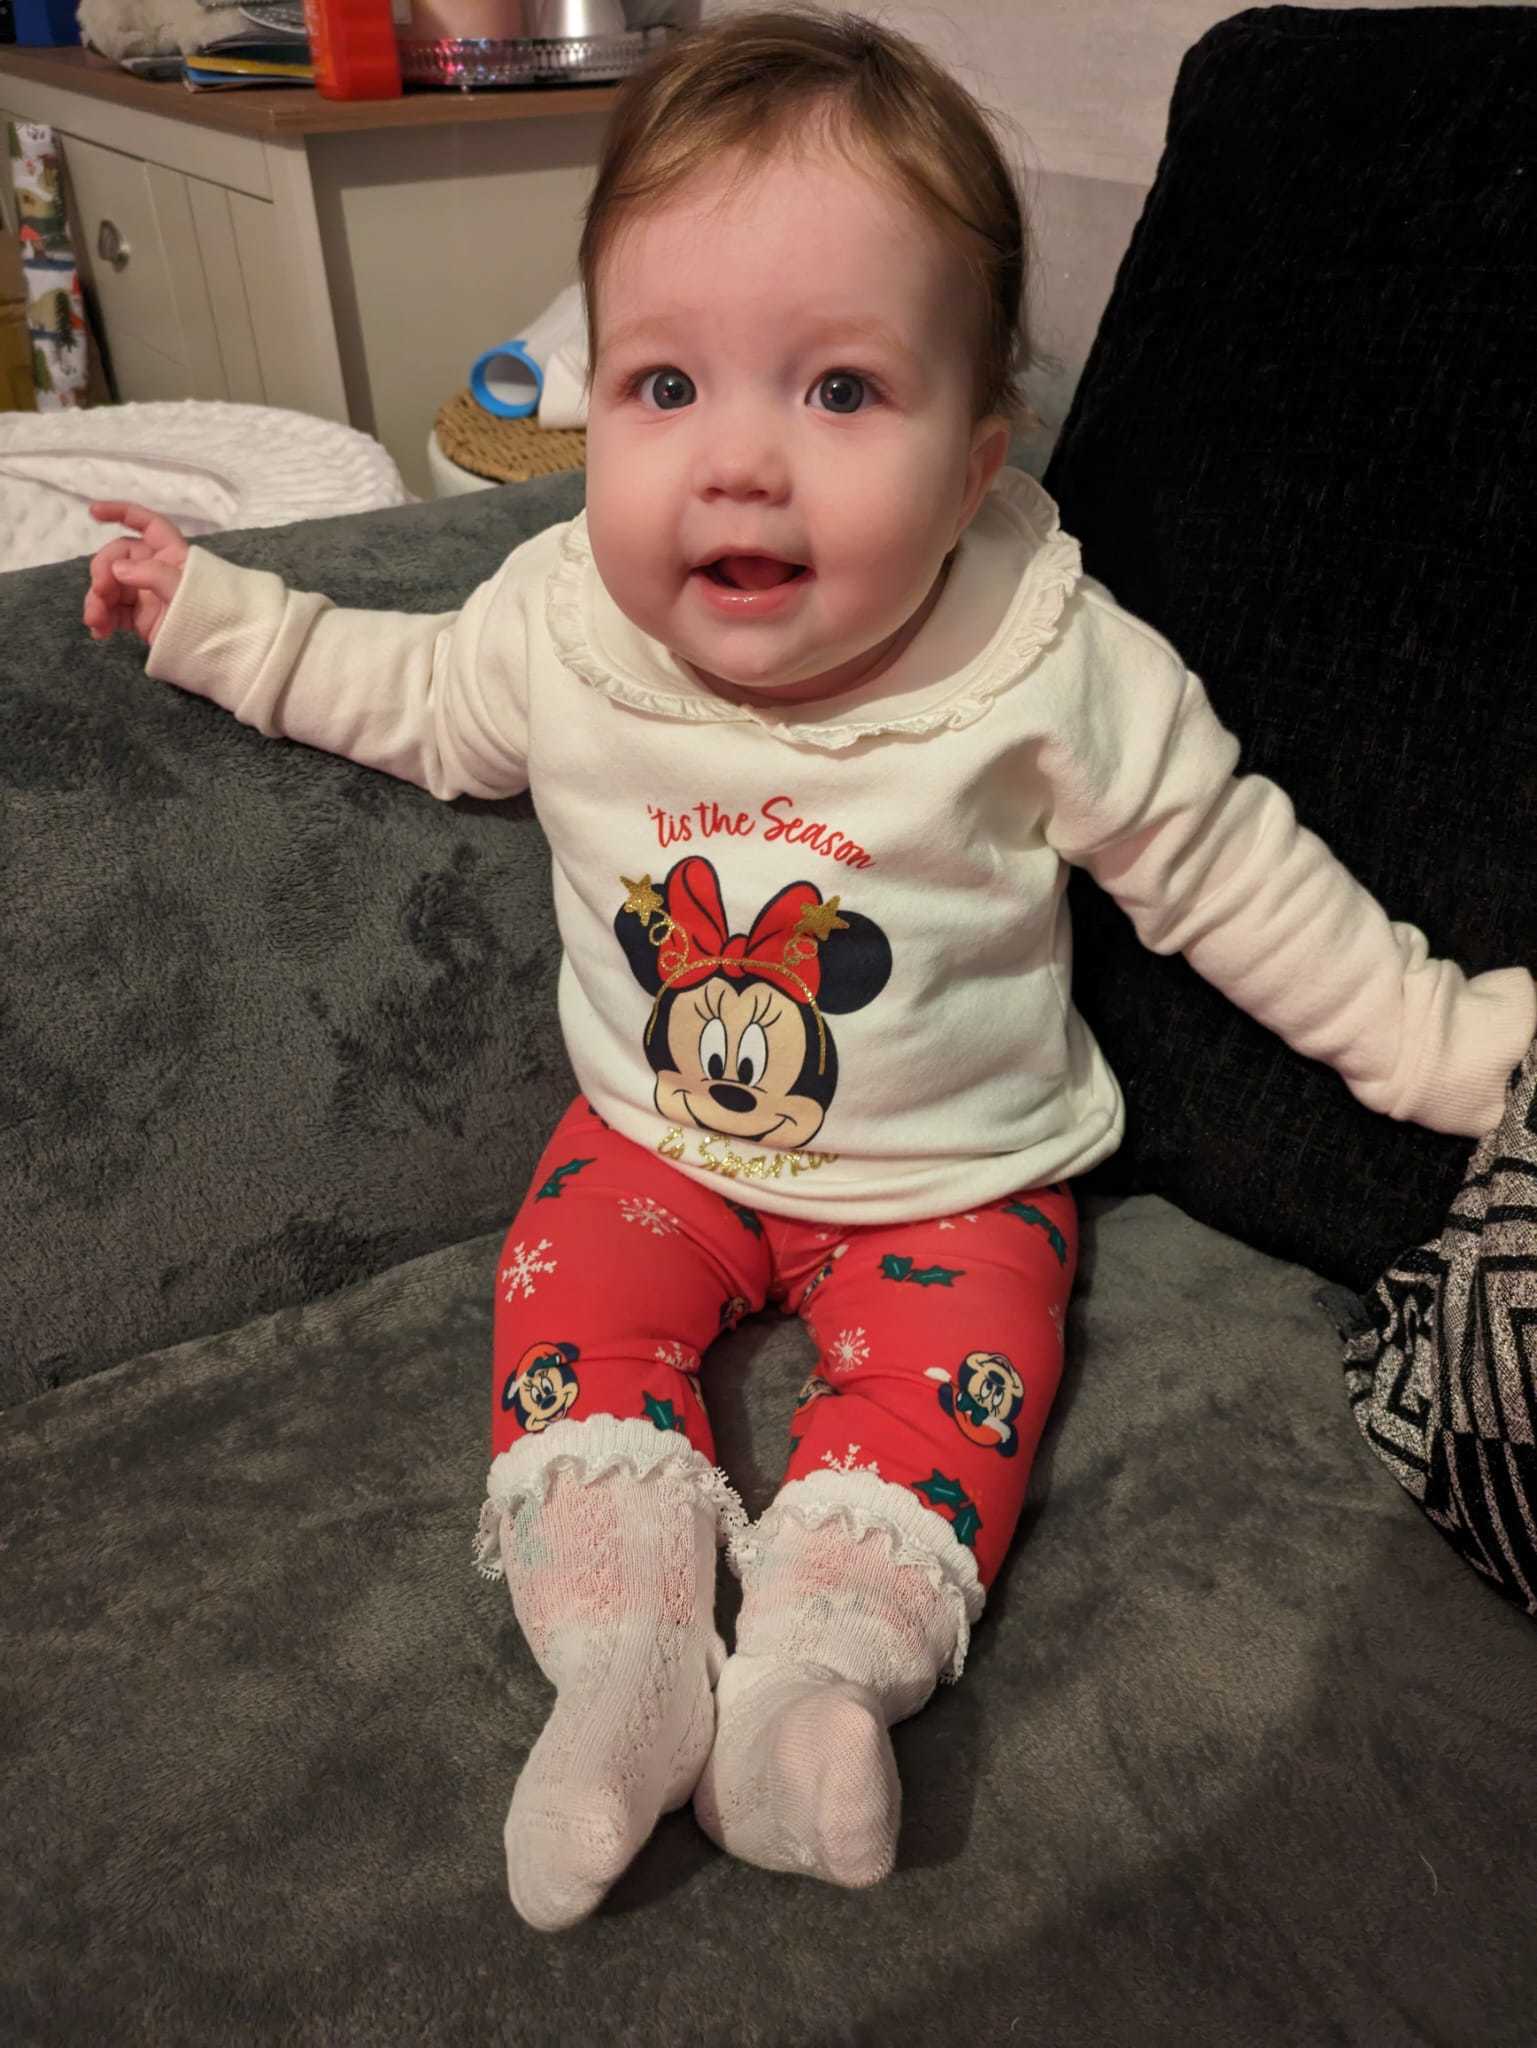 Gemma Nobbs, from Saltney: 10-month-old Esmay wearing her first Christmas outfit and getting ready for her very first trip to visit Santa!